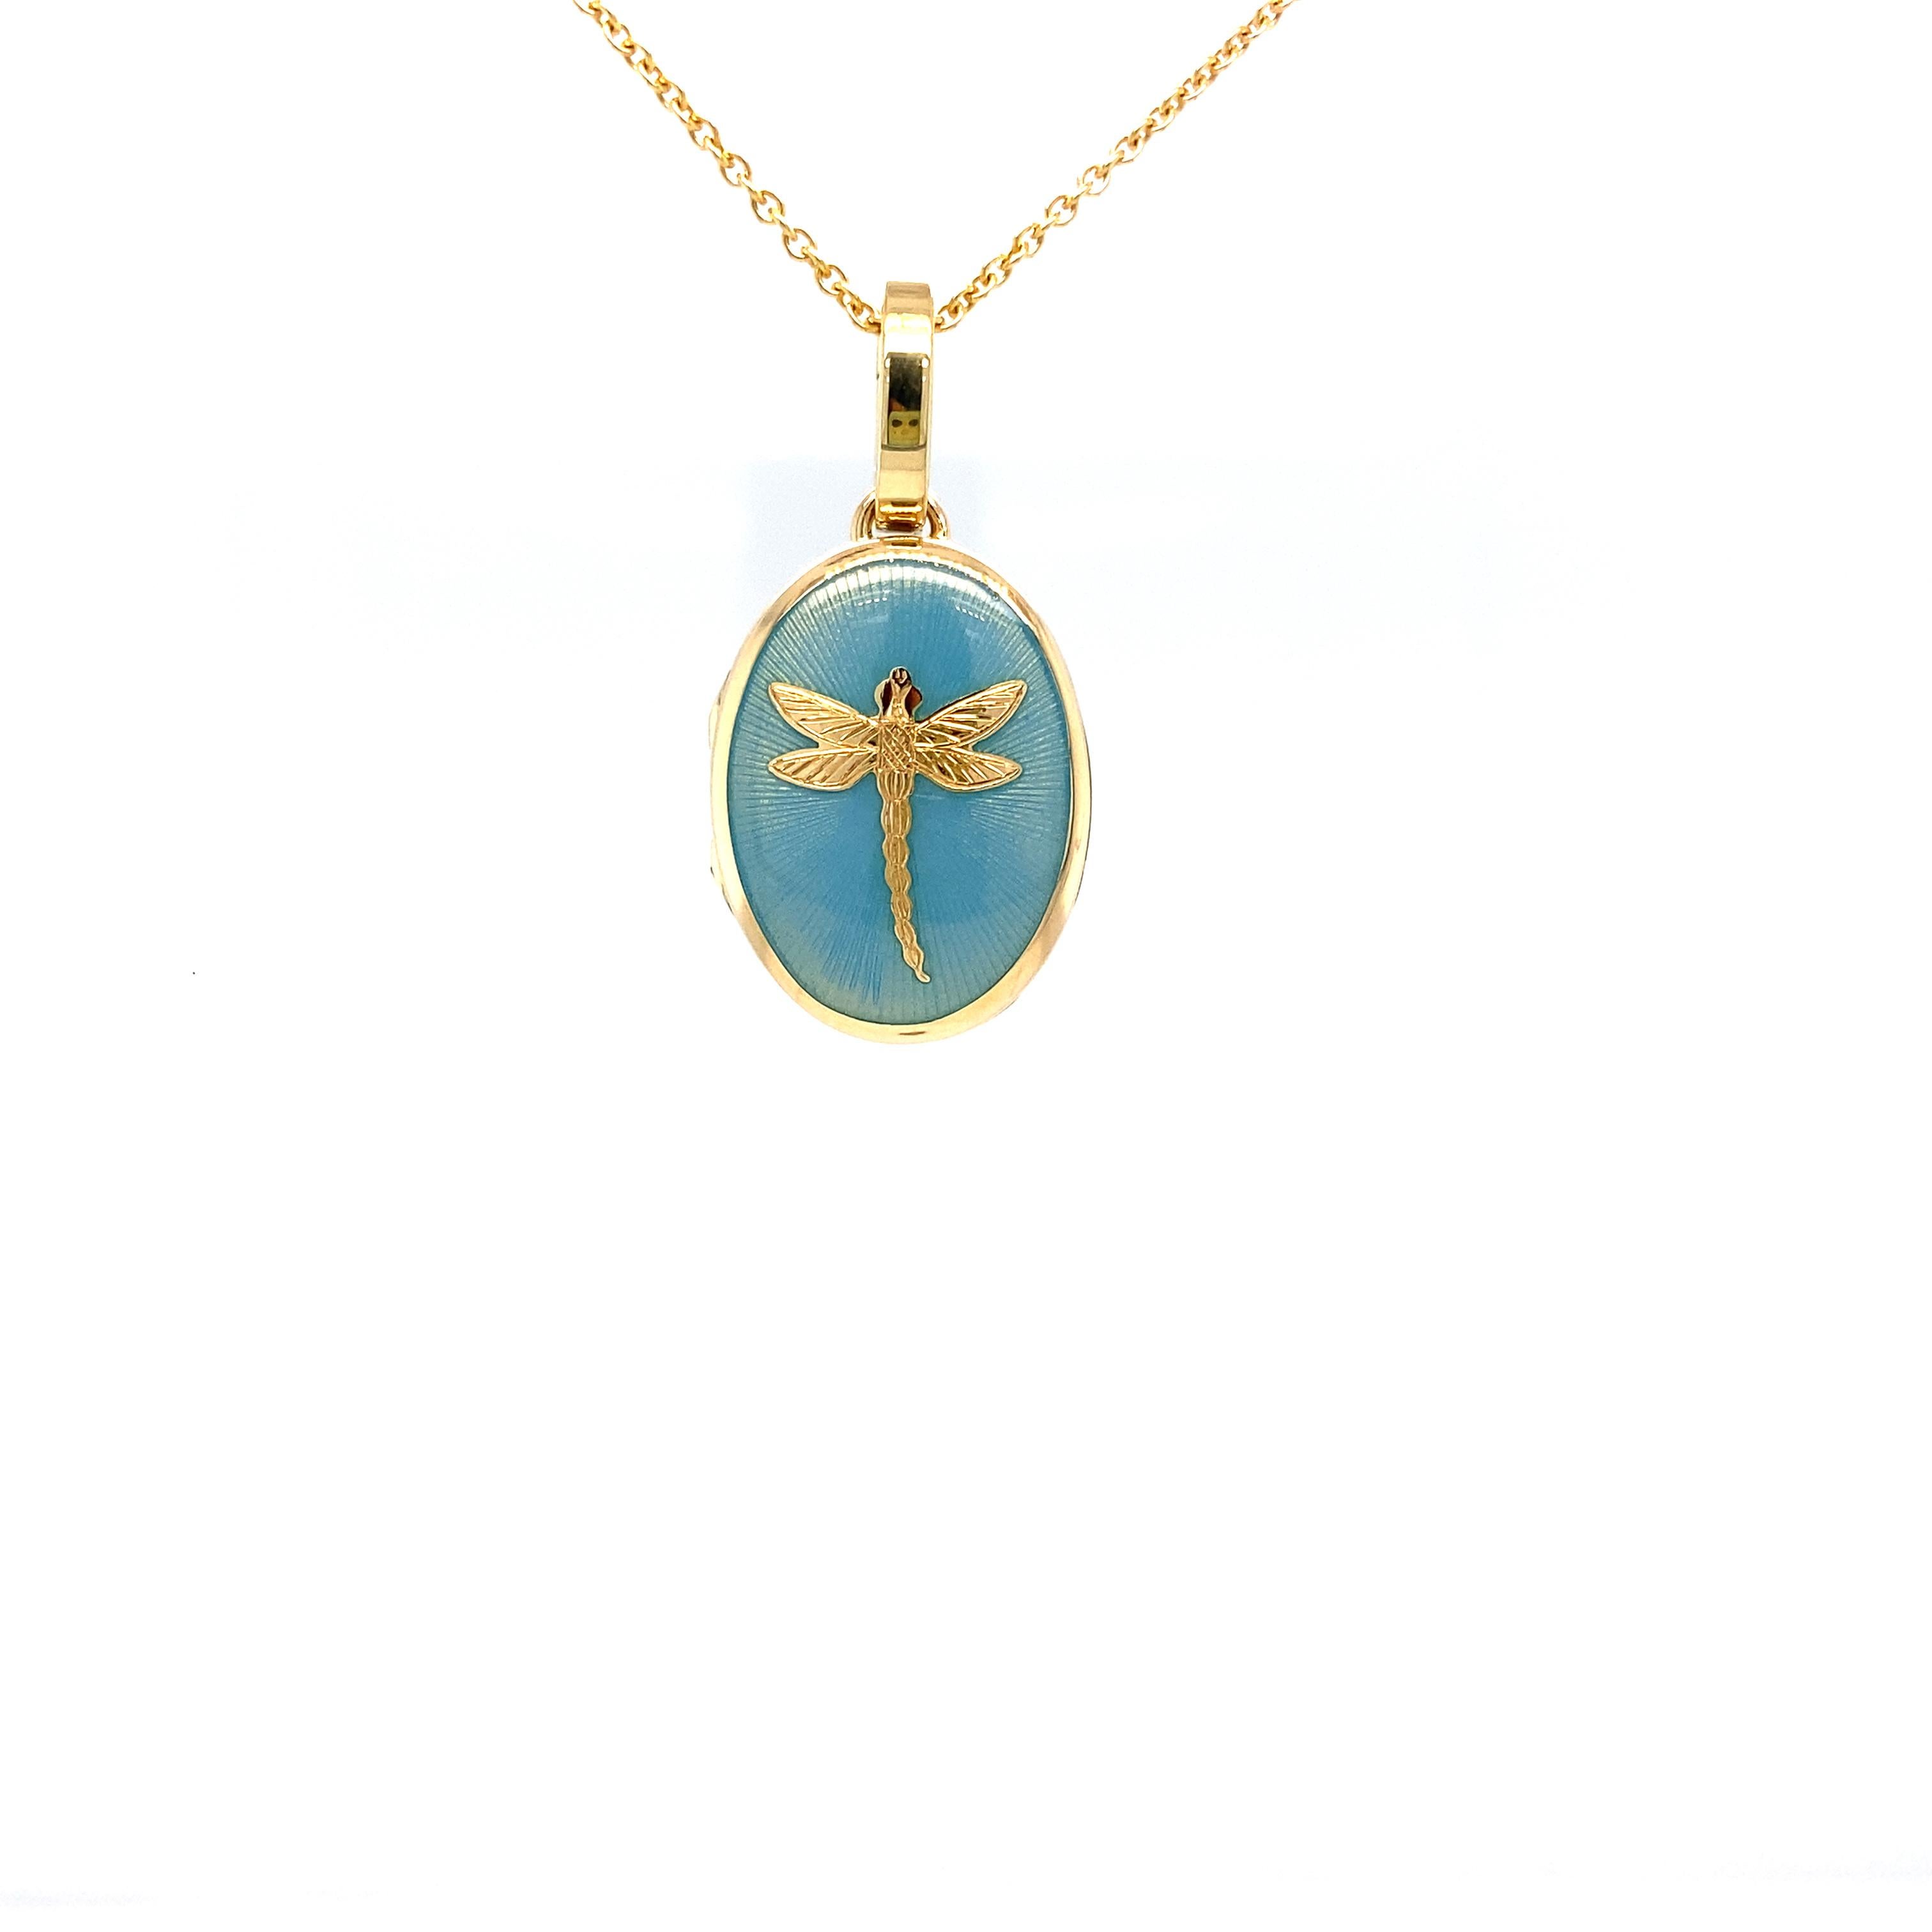 Victor Mayer customizable oval locket pendant necklace with dragonfly 18k yellow gold, Hallmark collection, translucent opalescent turquoise vitreous enamel, guilloche, measurements app. 15.0 mm x 20.0 mm

About the creator Victor Mayer
Victor Mayer